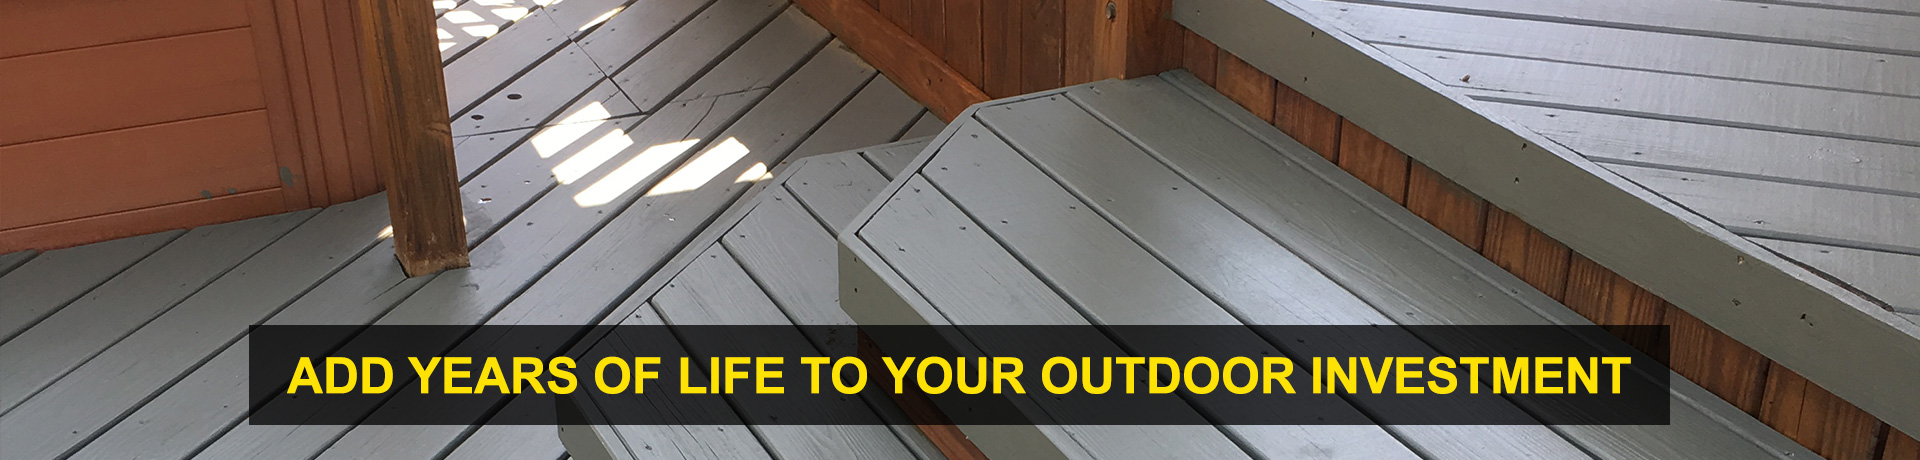 Add Years of Life to Your Outdoor Investment